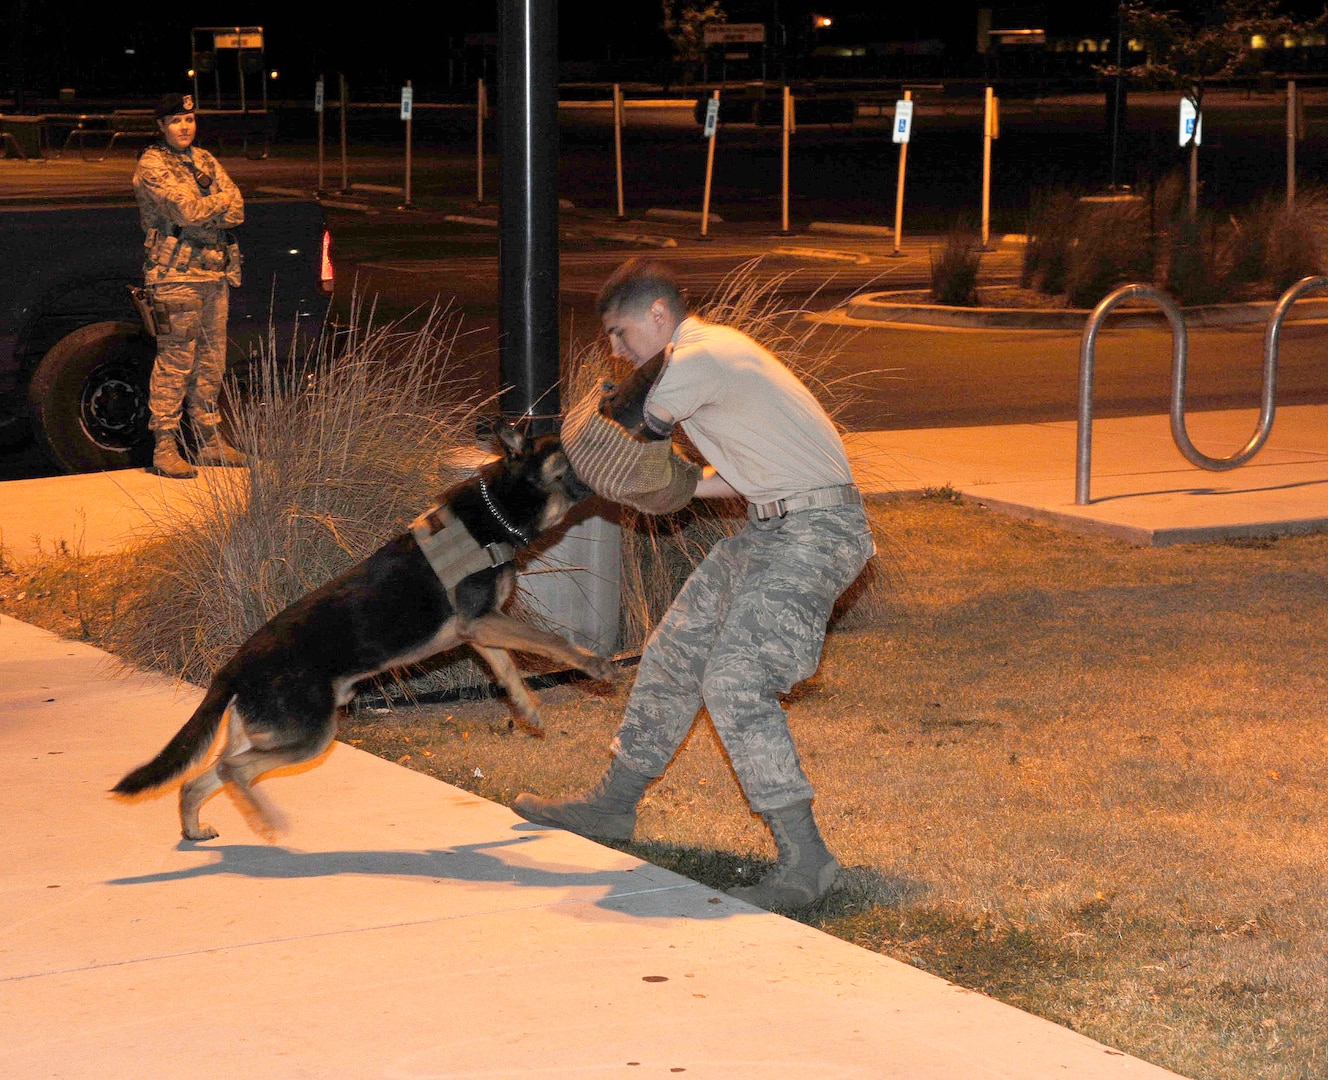 Troy, 902nd Security Forces Squadron military working dog, attacks Airman 1st Class Joshua Royer, installation patrolman, during training while Airman 1st Class Melinda Ashley, base entry controller, looks on at Joint Base San Antonio-Randolph, Texas, on June 22.  
(U.S. Air Force Photo by Don Lindsey) 